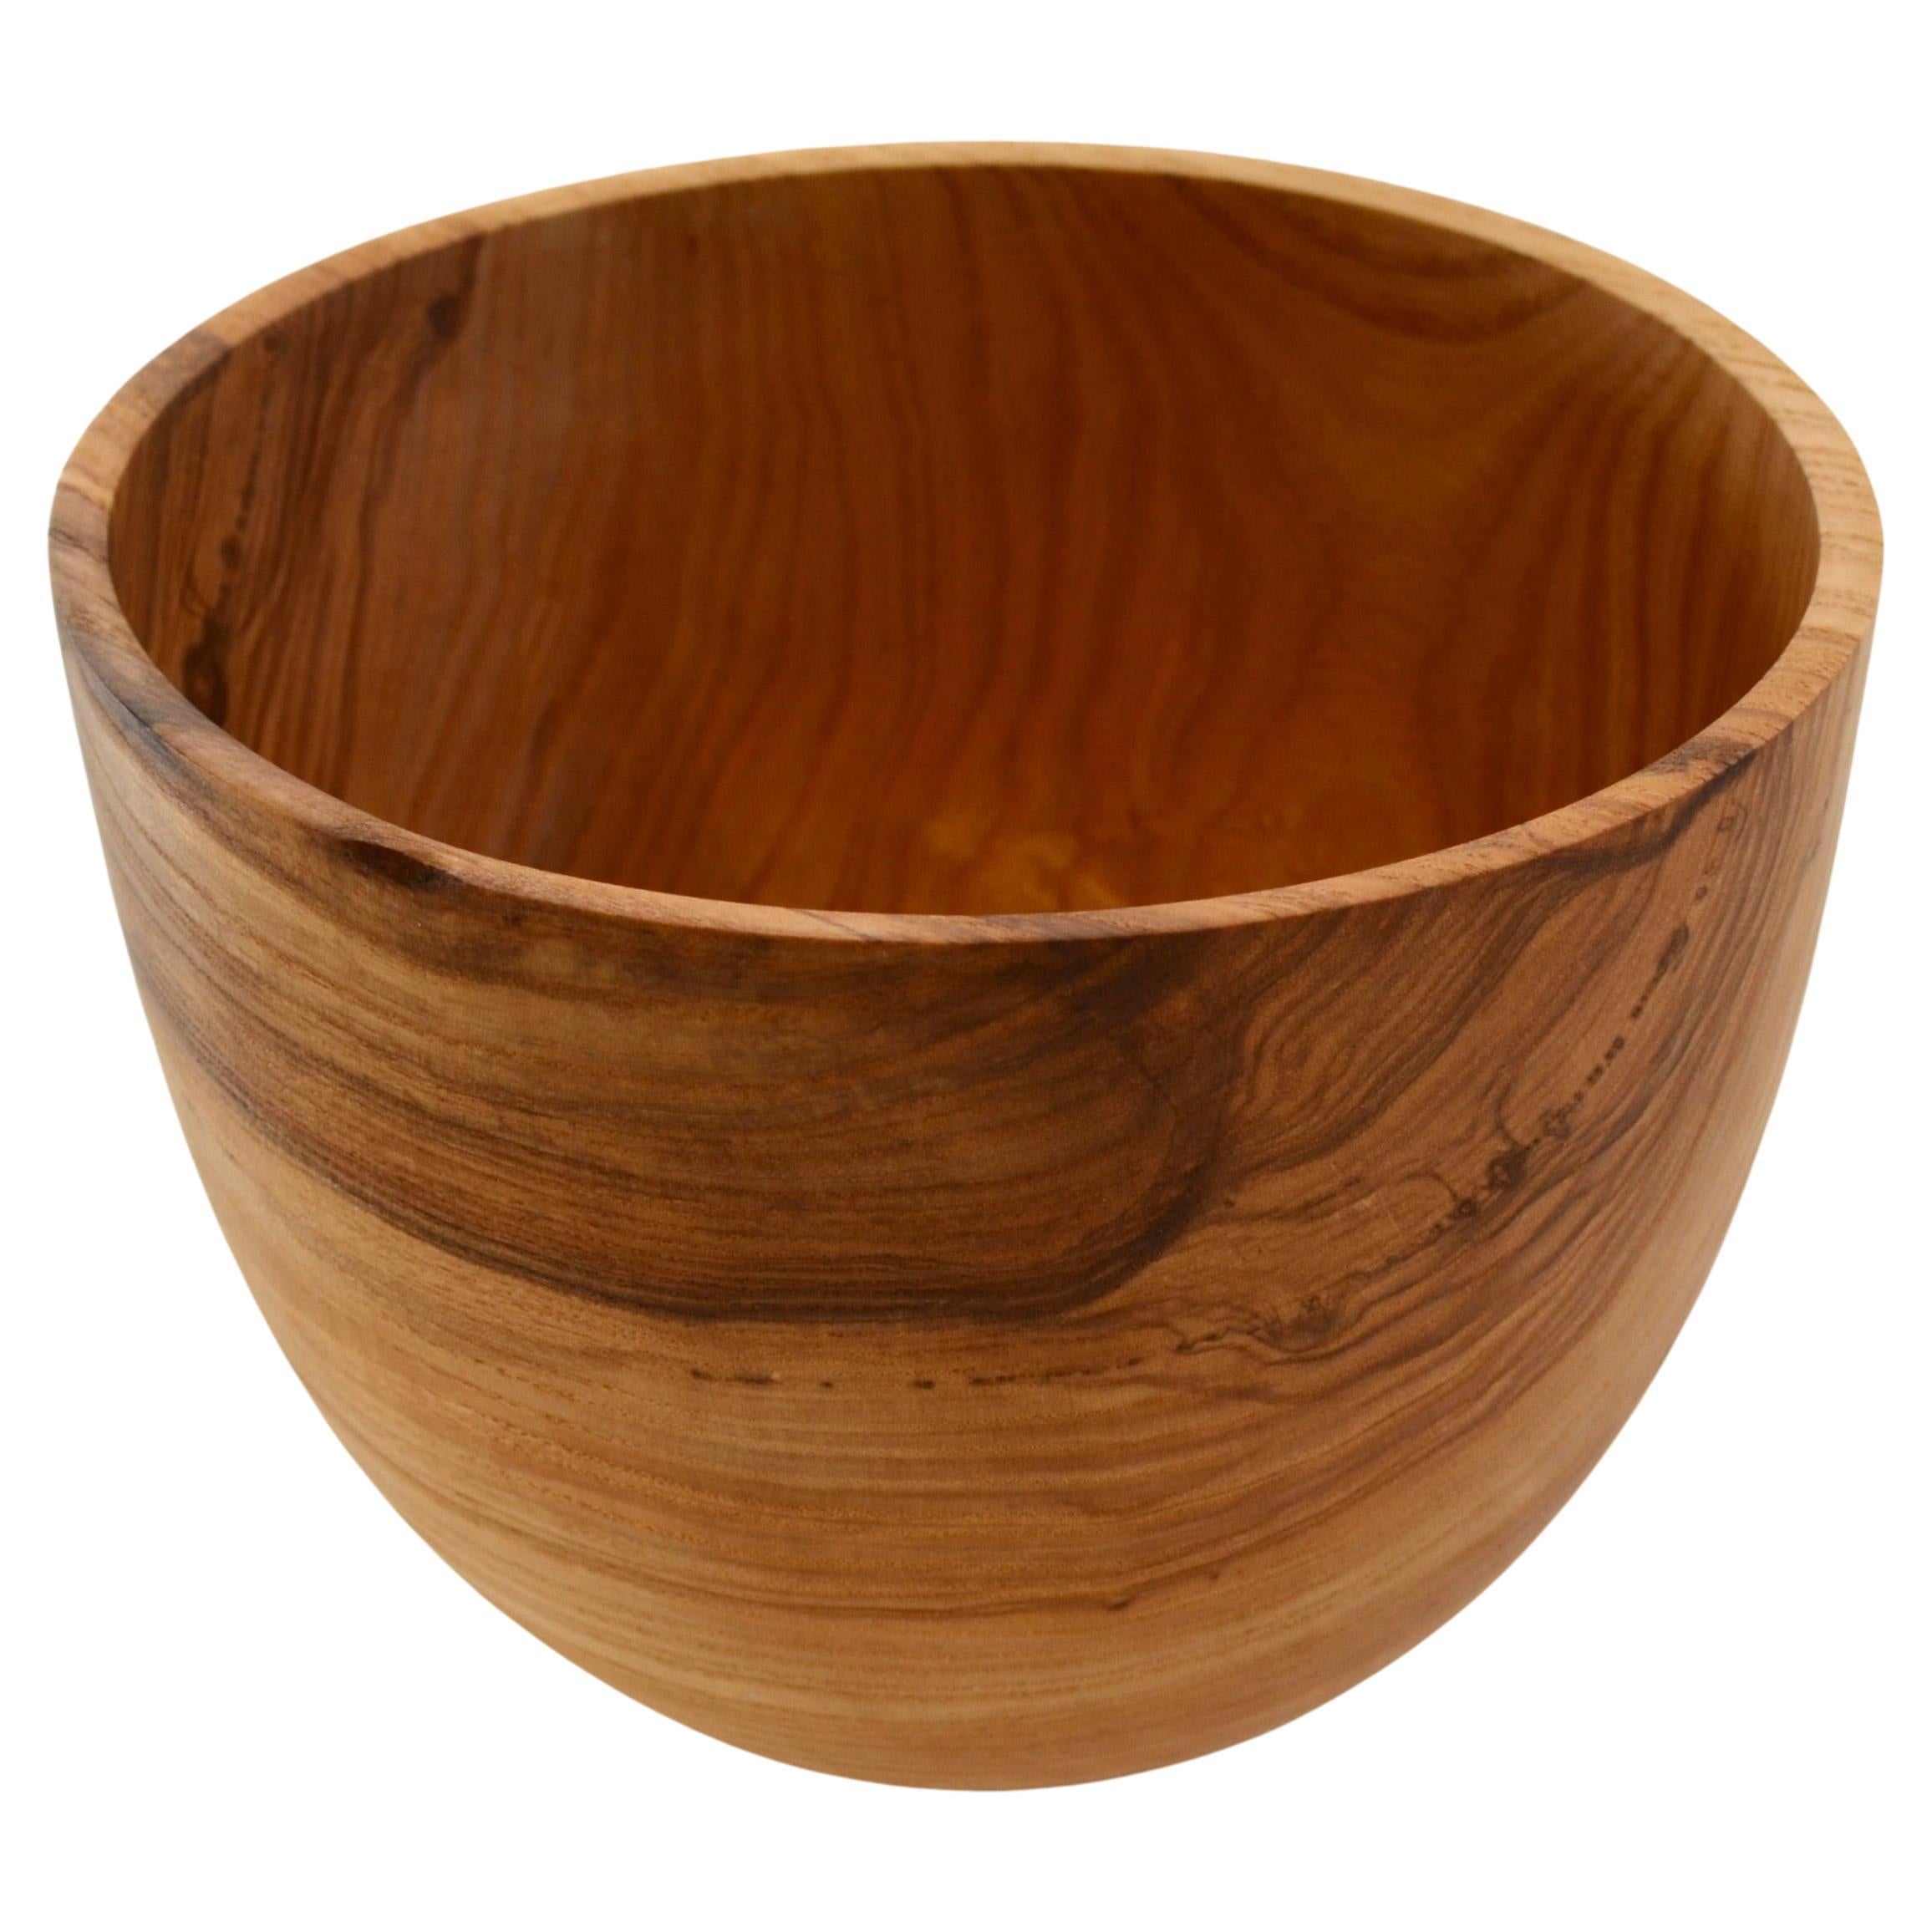 Hand-Carved Bowls and Baskets